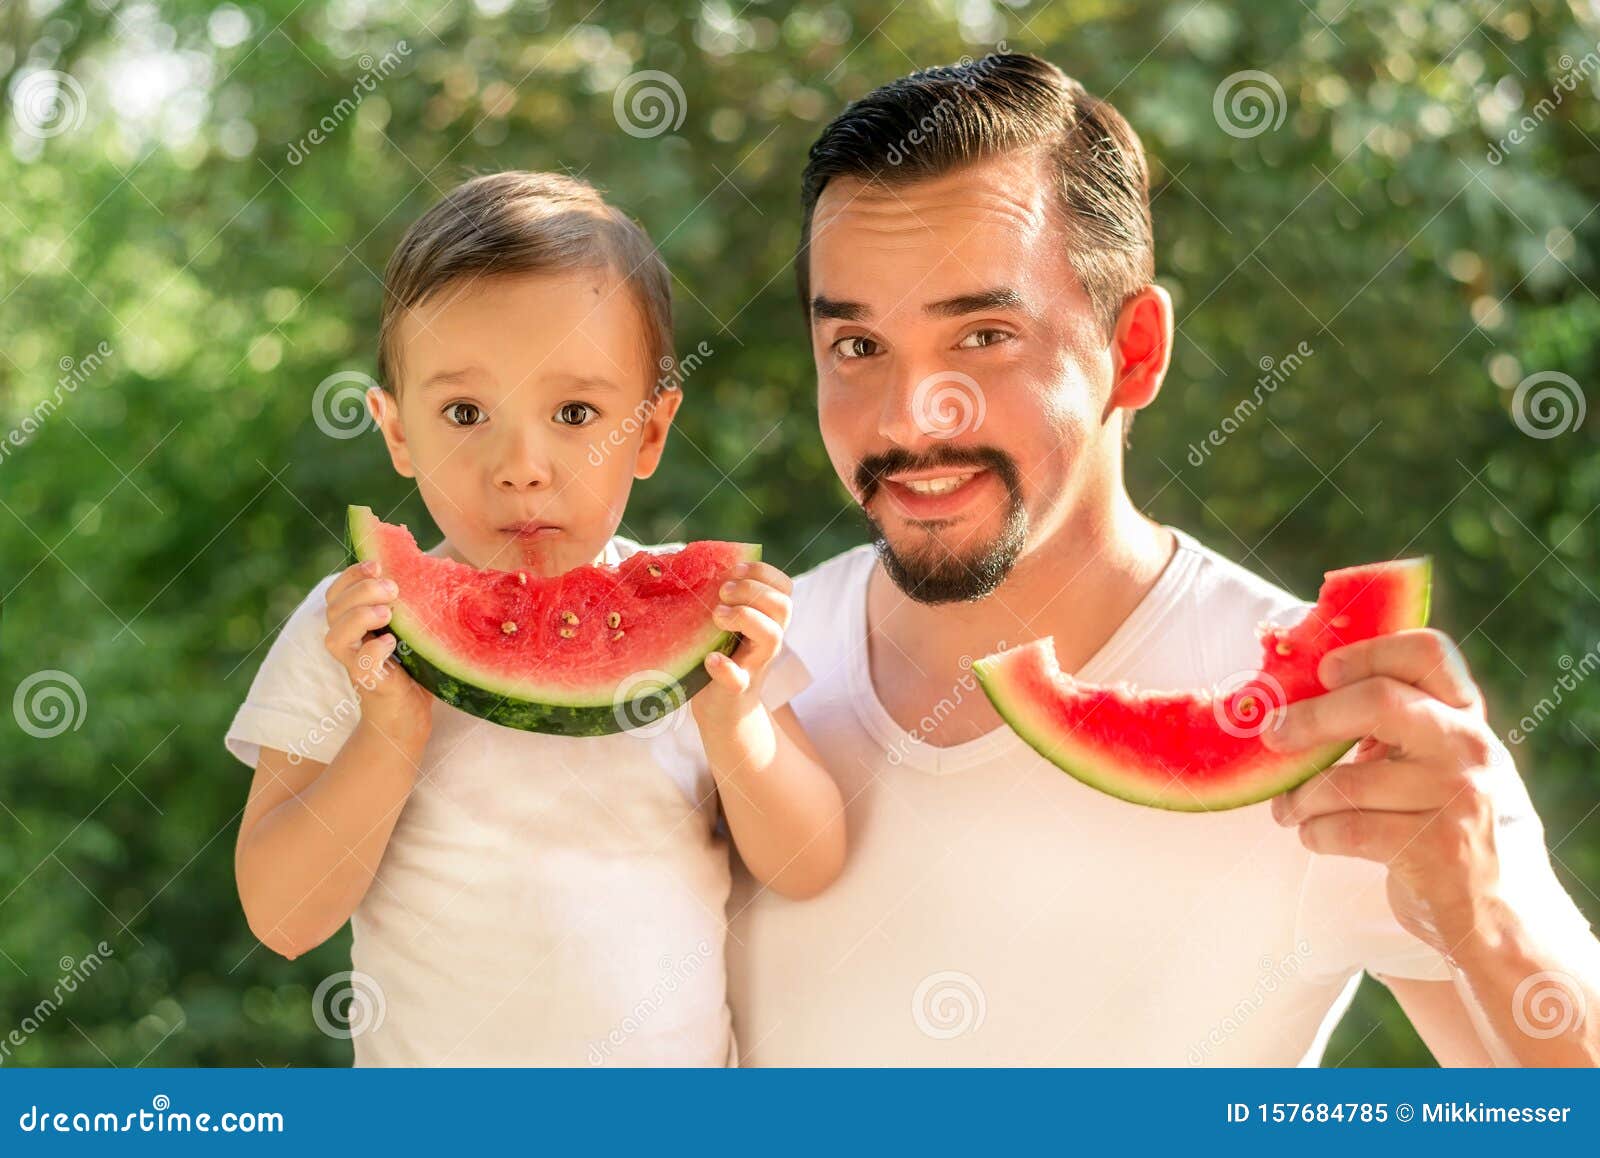 father and son together eating watermelons, both man and kid are holding slices of juicy watermelons, green leaves in background